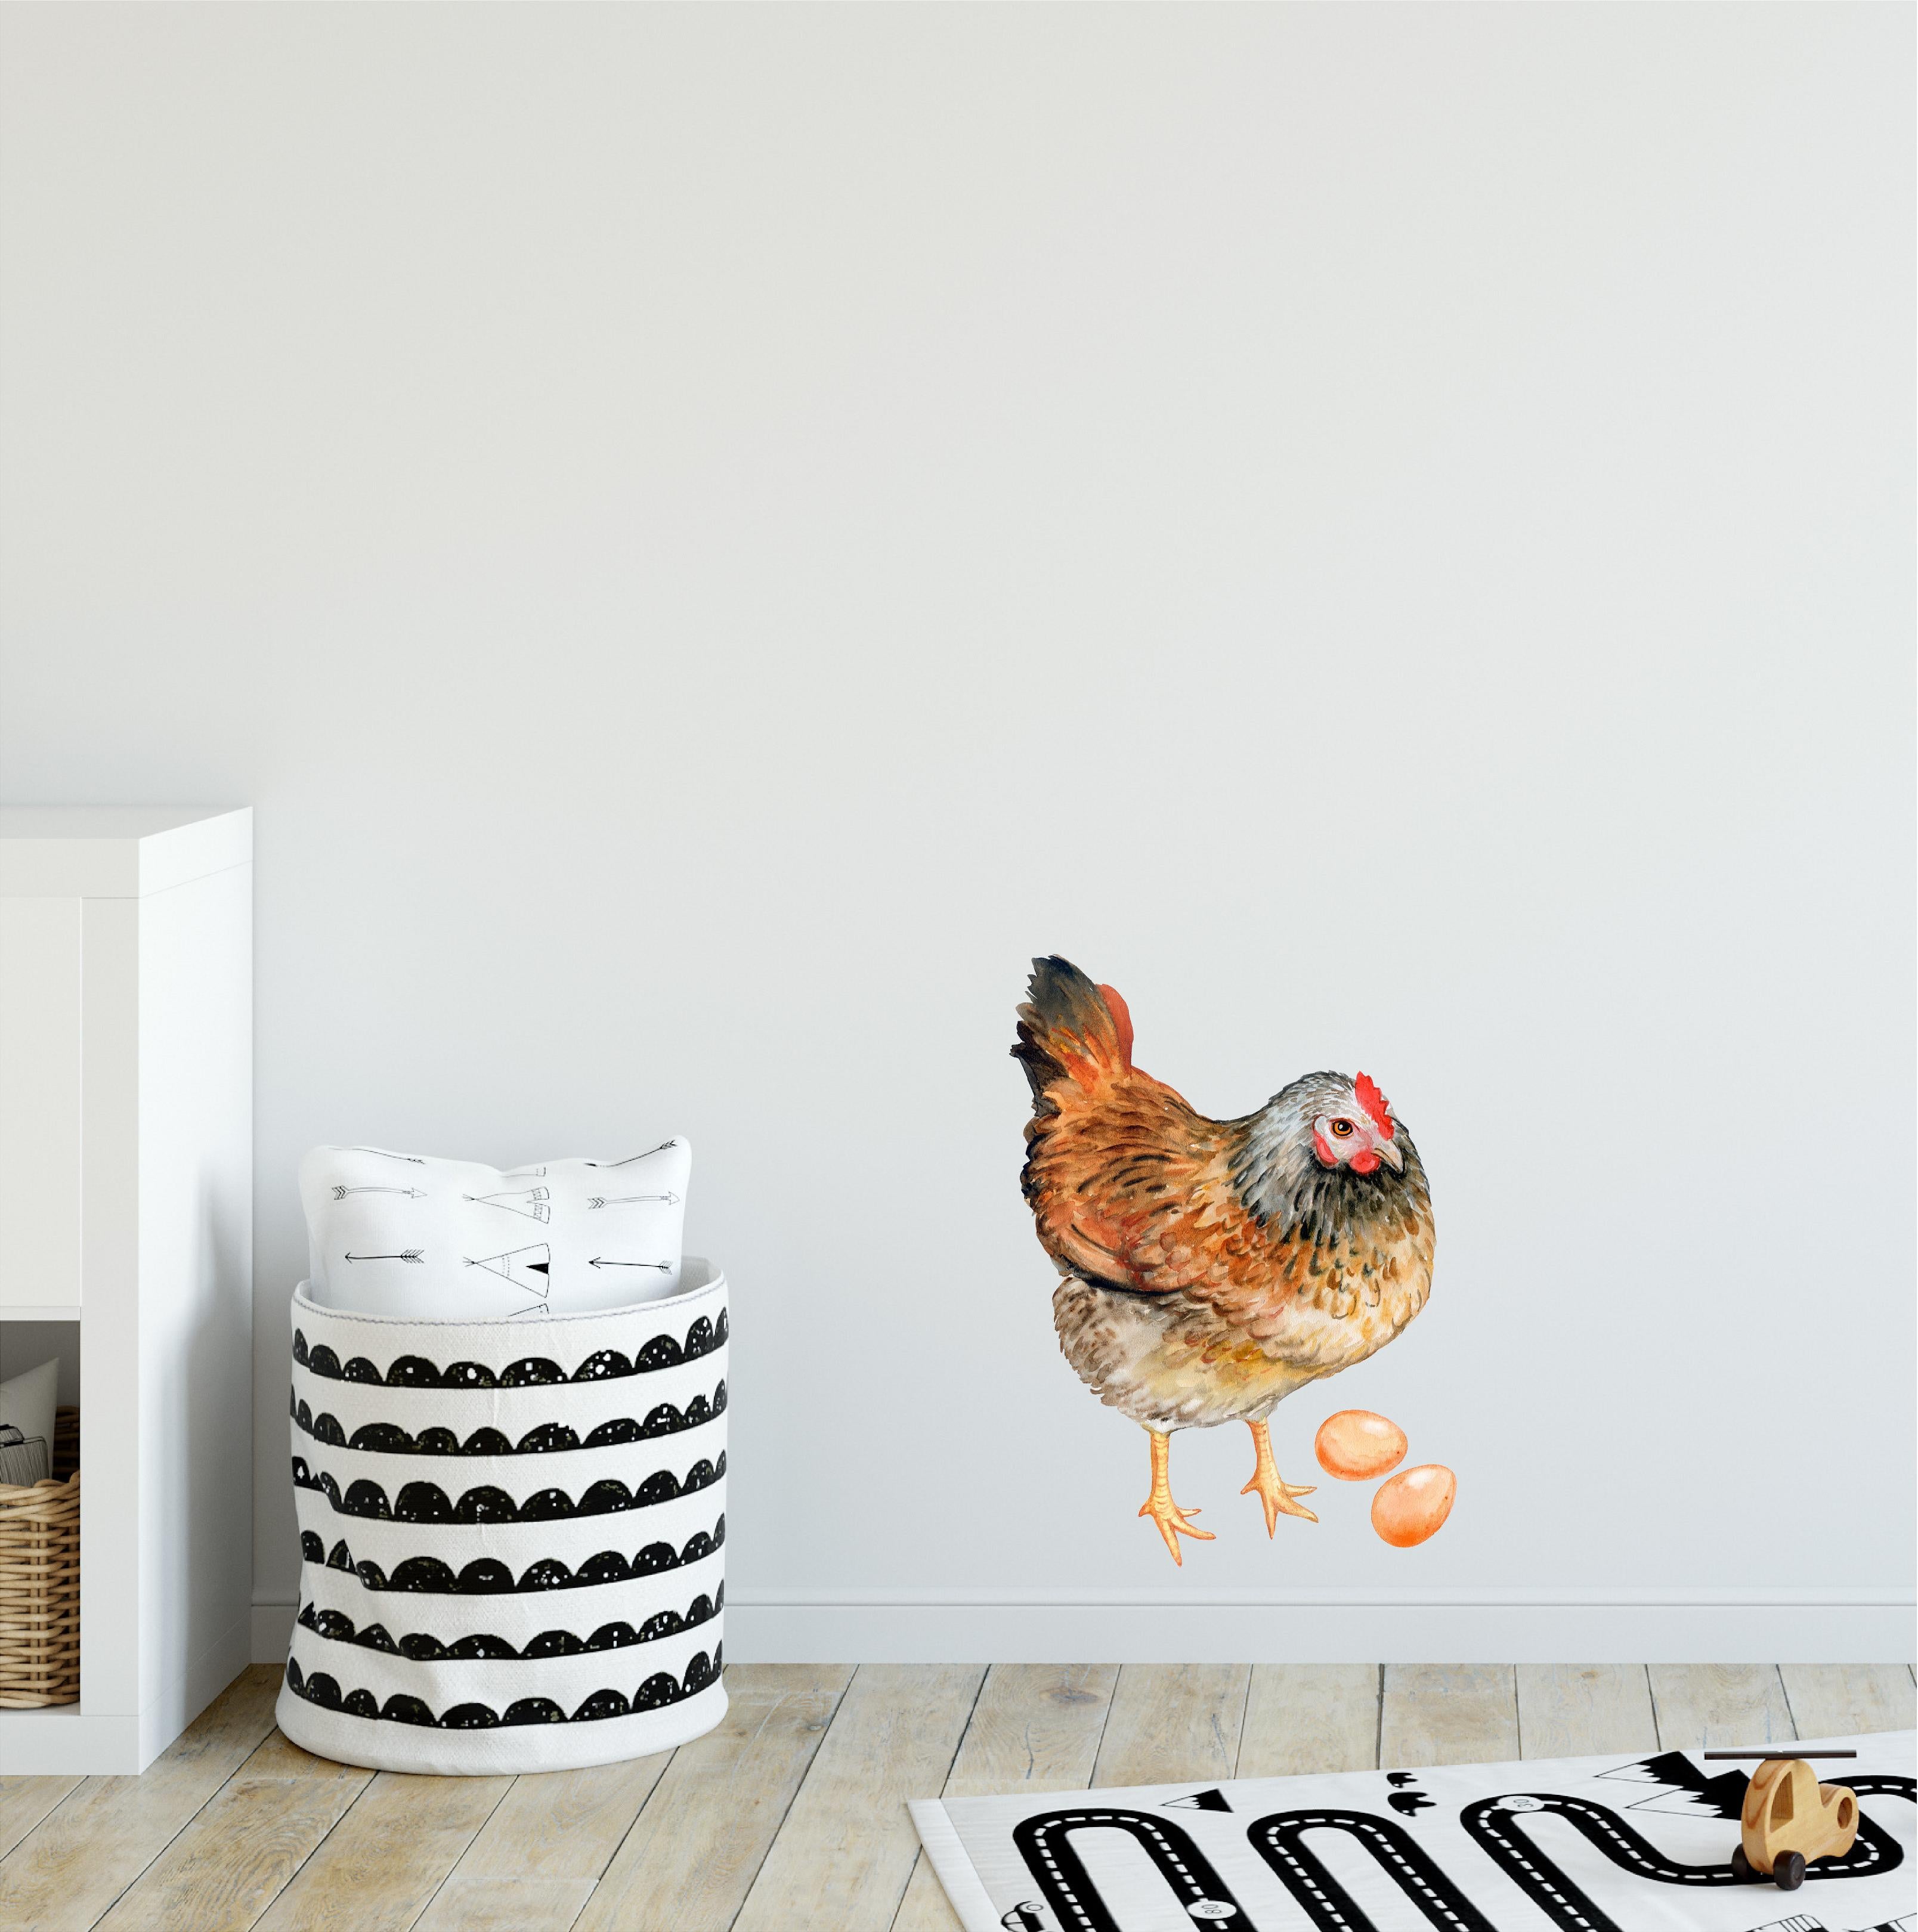 Speckled Hen with Eggs Wall Decal Chicken Farm Animal Fabric Wall Sticker | DecalBaby